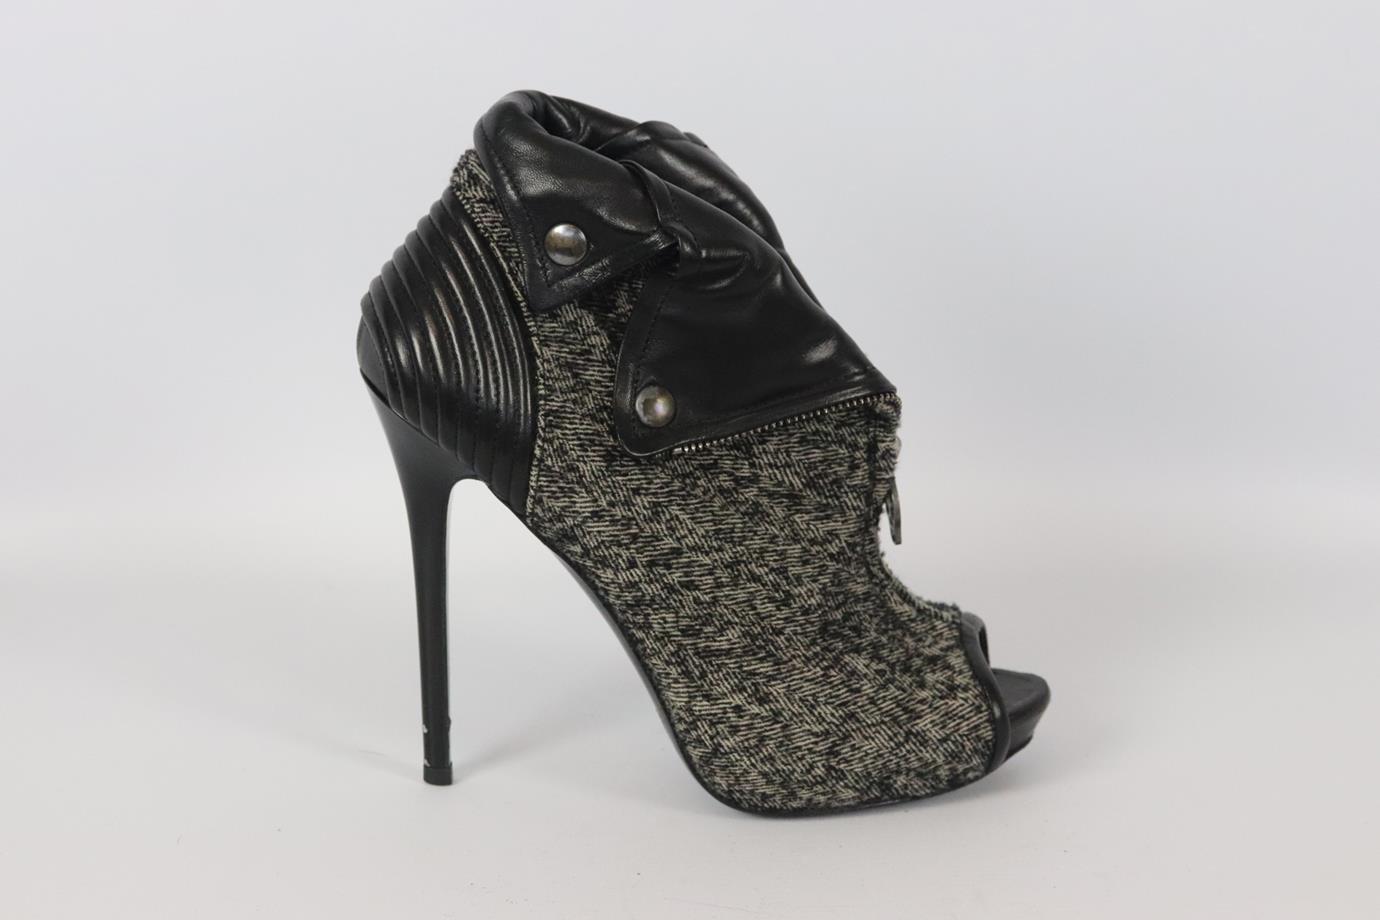 ALEXANDER MCQUEEN TWEED AND LEATHER PEEP TOE ANKLE BOOTS EU 38 UK 5 US 8